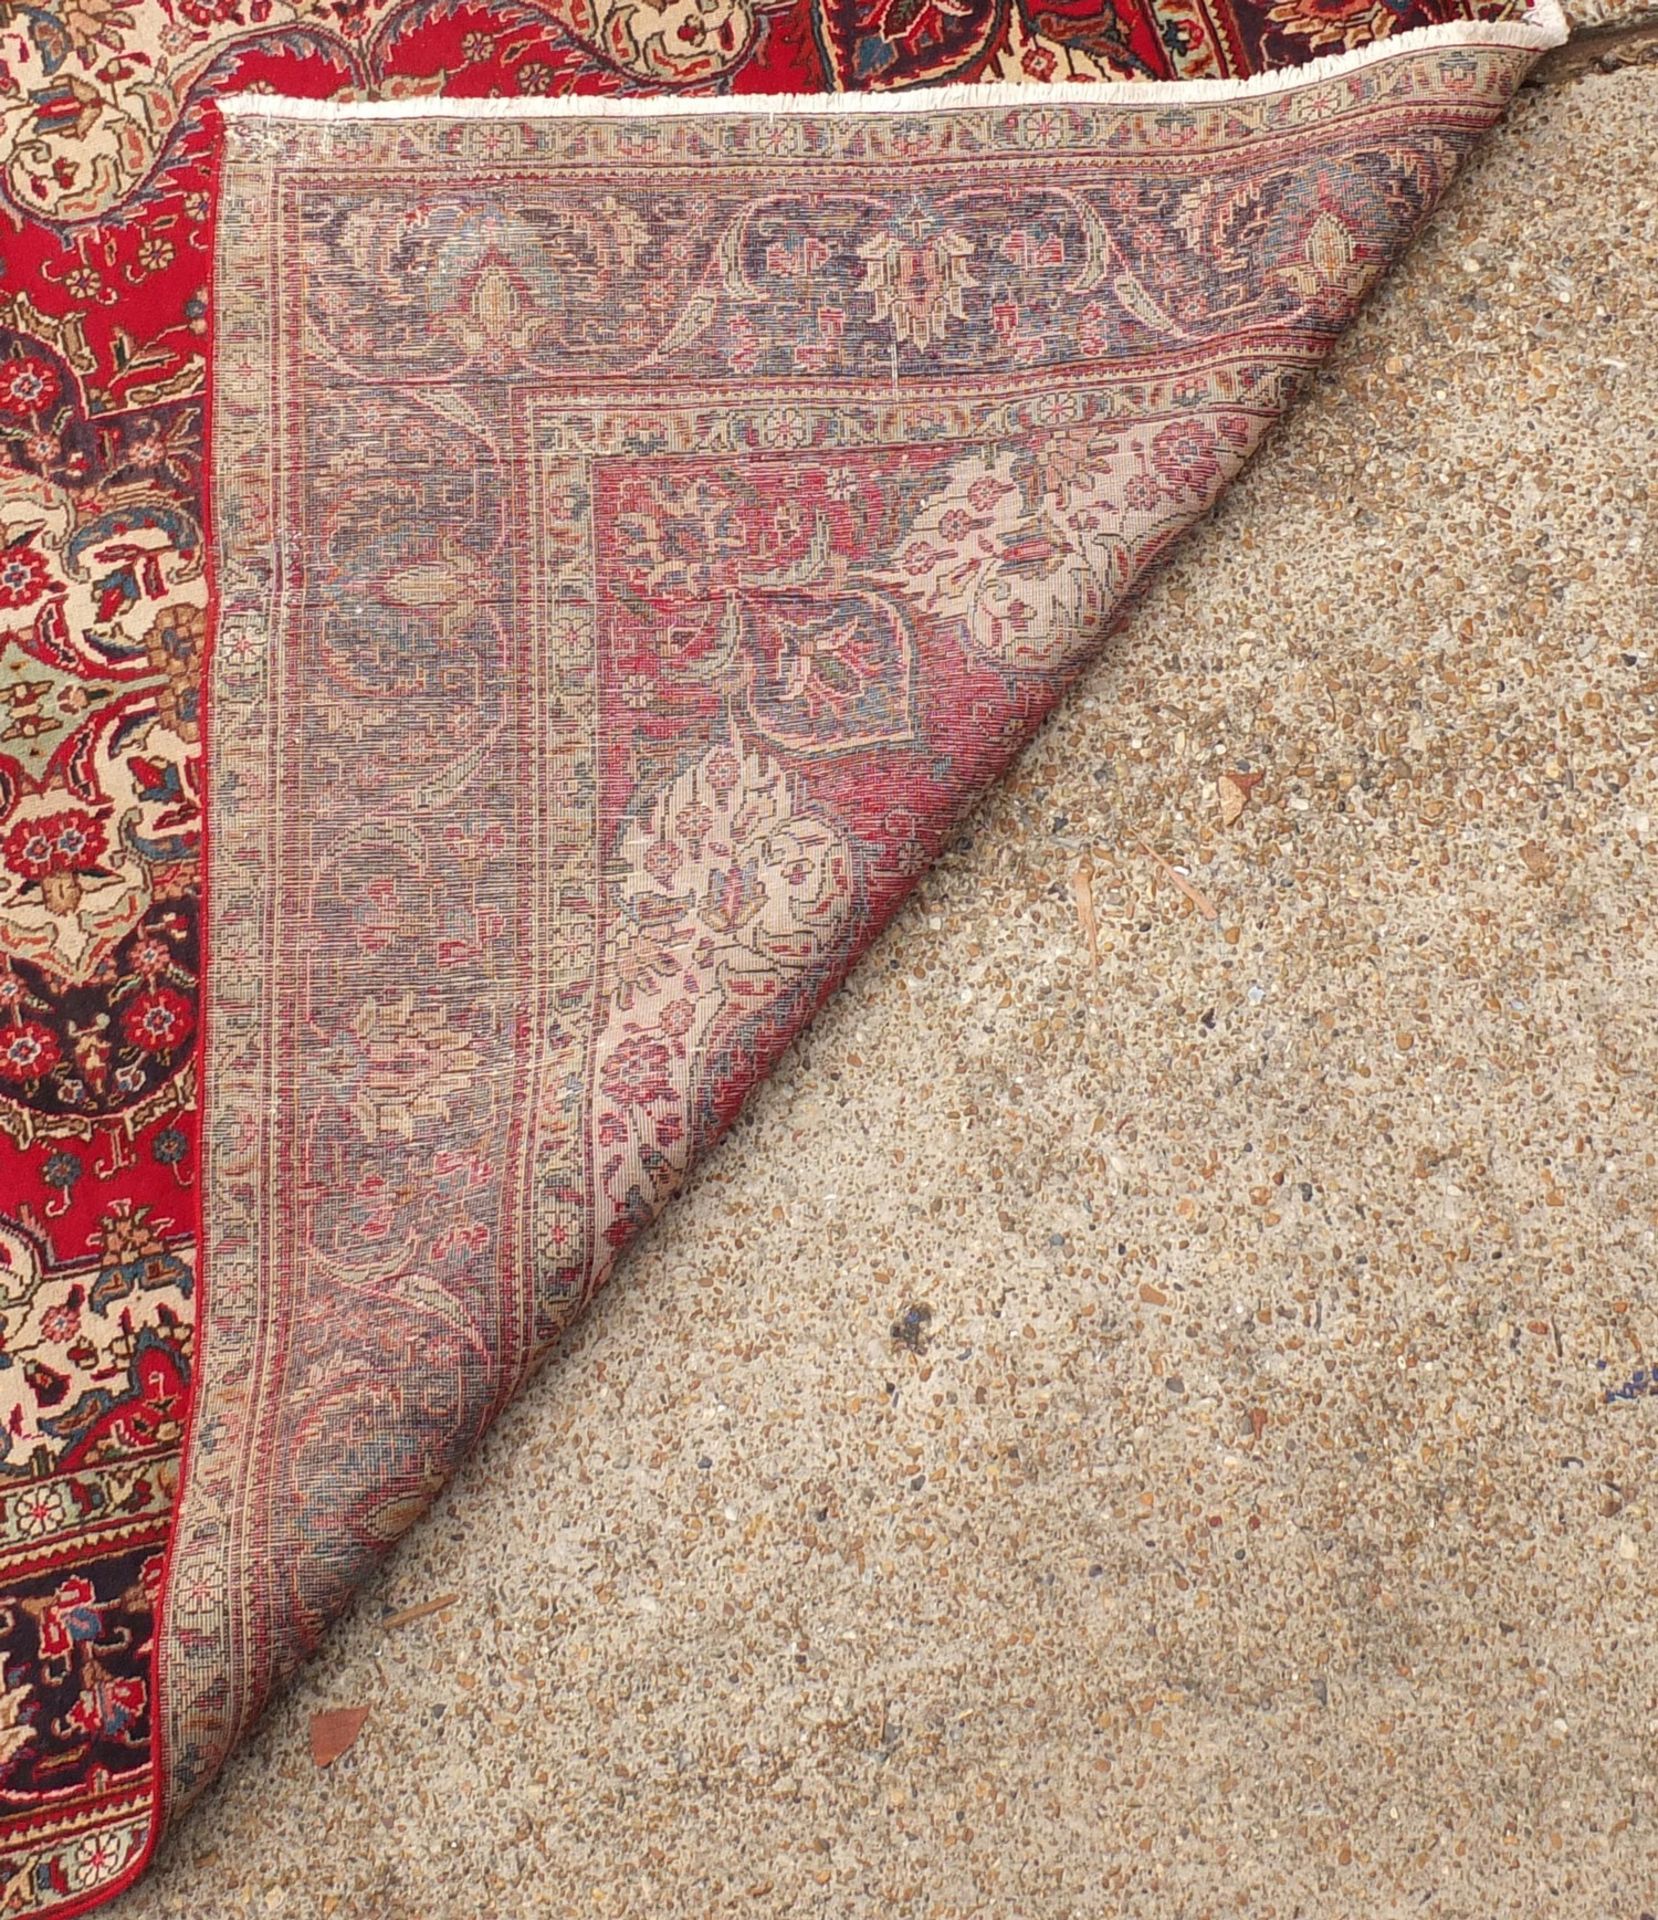 Hand made Iranian carpet with stylised floral pattern onto a red and blue ground, 354cm x 254cm : - Image 4 of 4